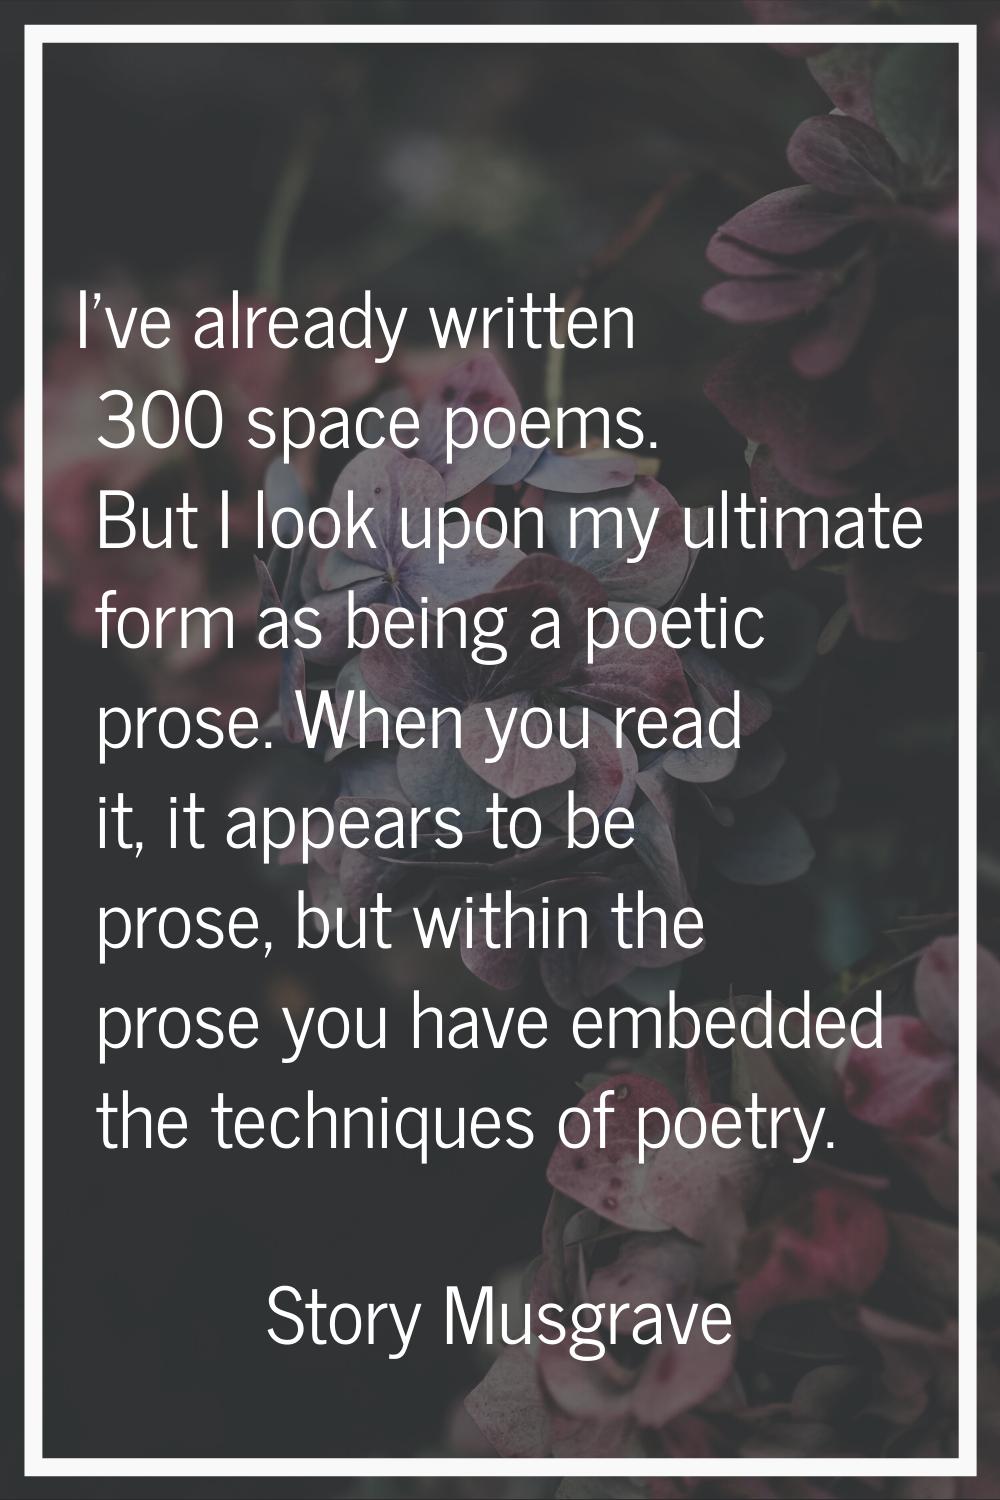 I've already written 300 space poems. But I look upon my ultimate form as being a poetic prose. Whe